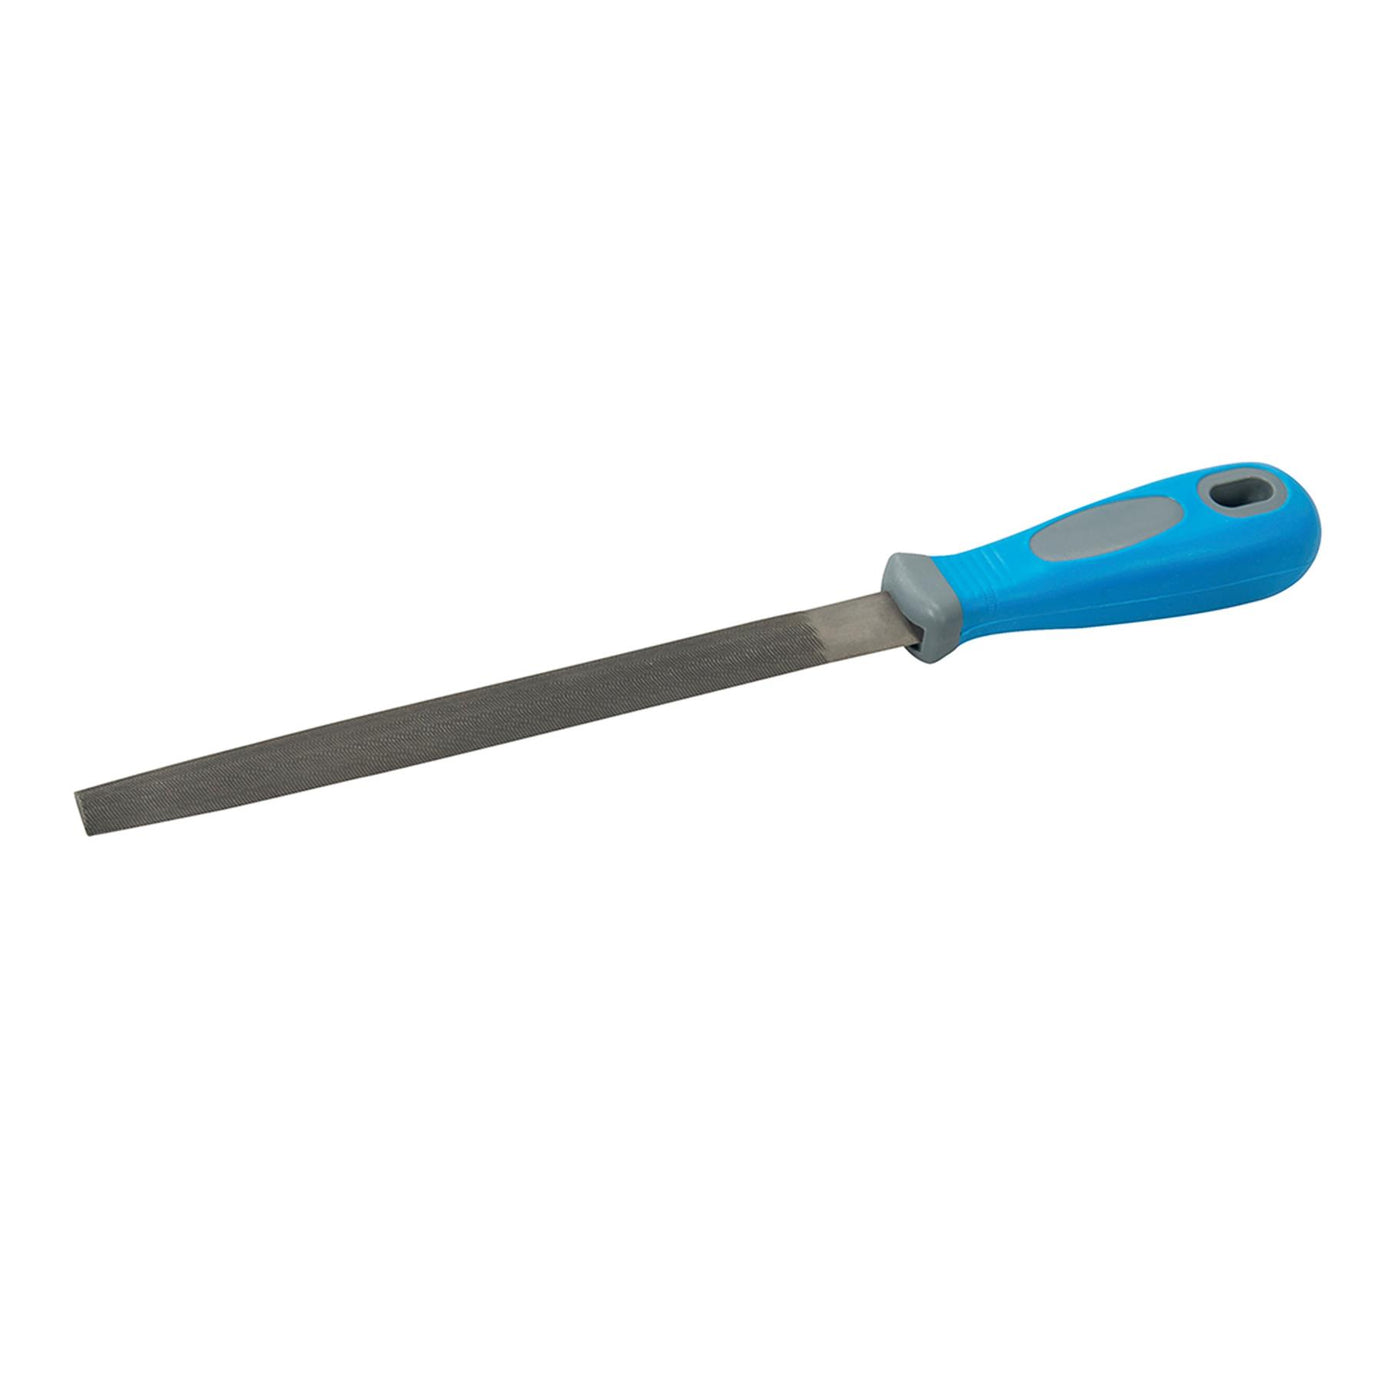 Half Round File 250mm 2nd Cut Soft-Grip Handle With Hanging Hole Quality